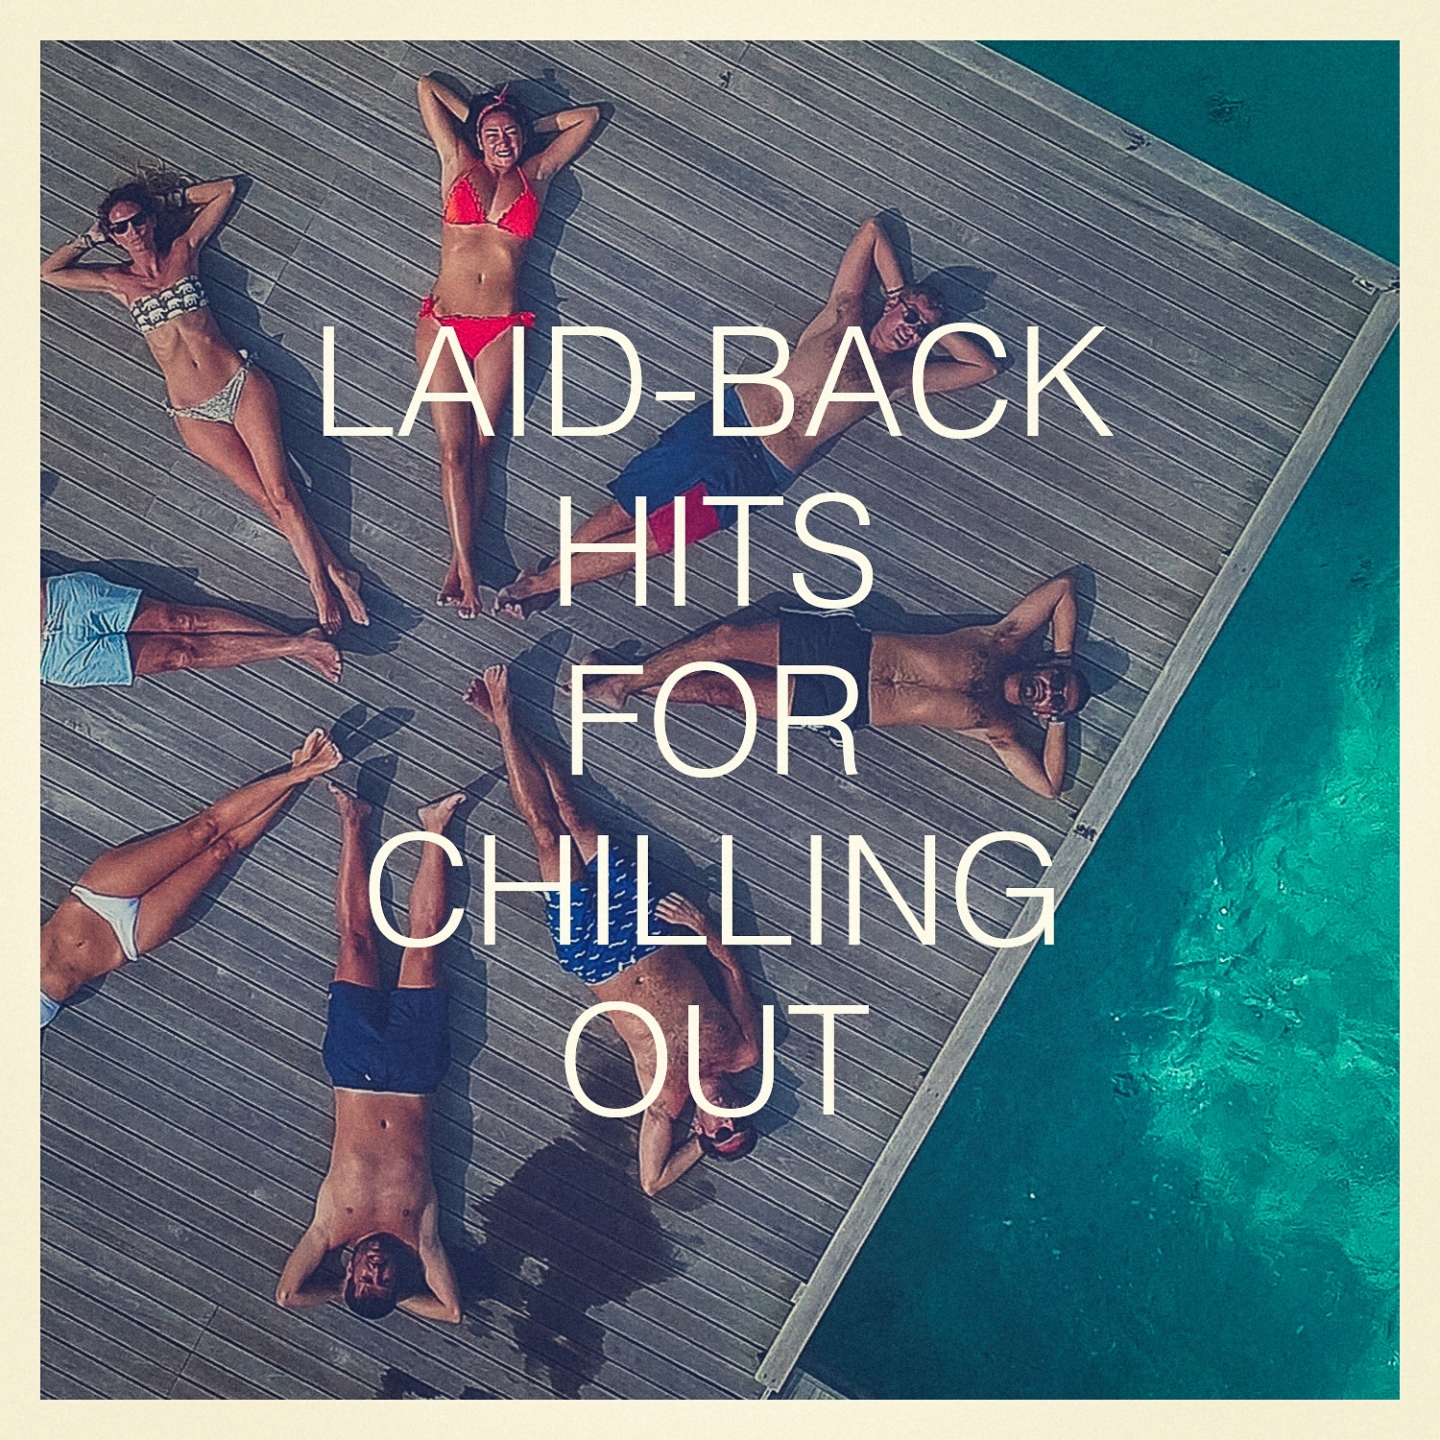 Laid-Back Hits for Chilling Out